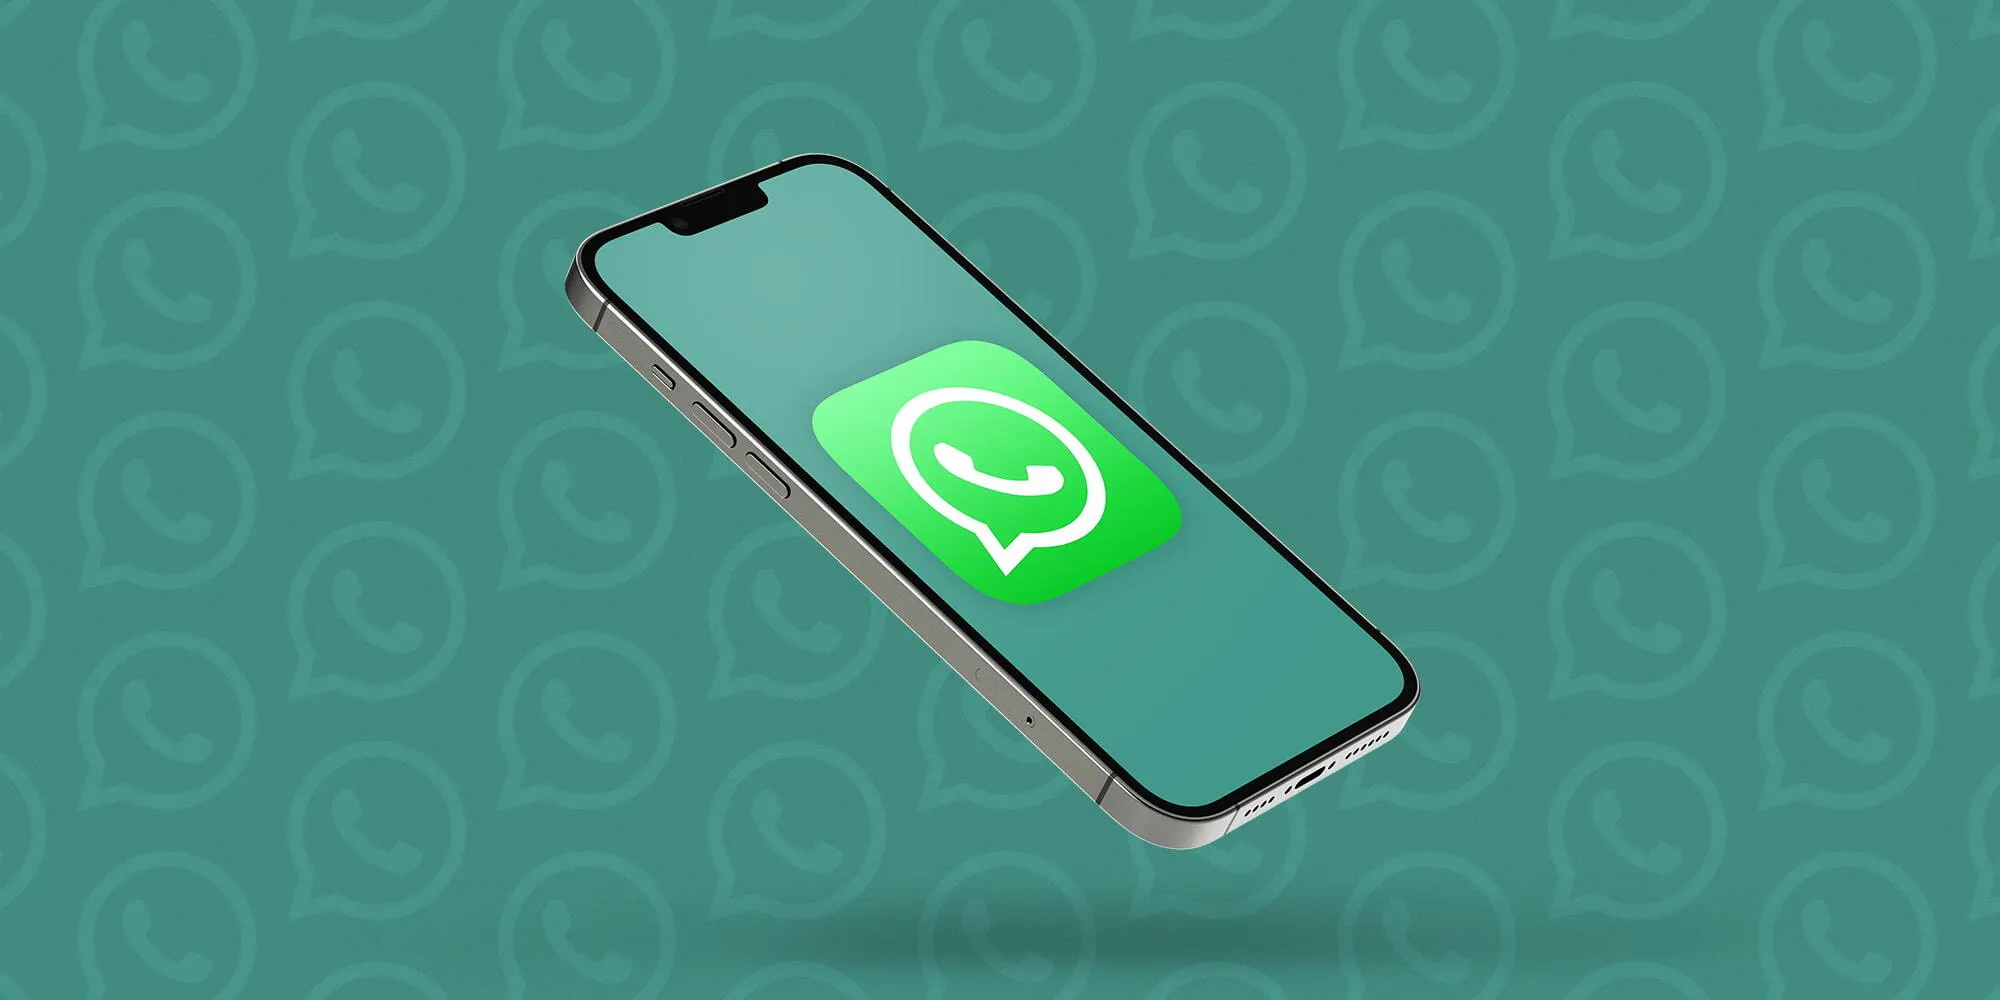 WhatsApp will soon let users disable Instant Video Messages